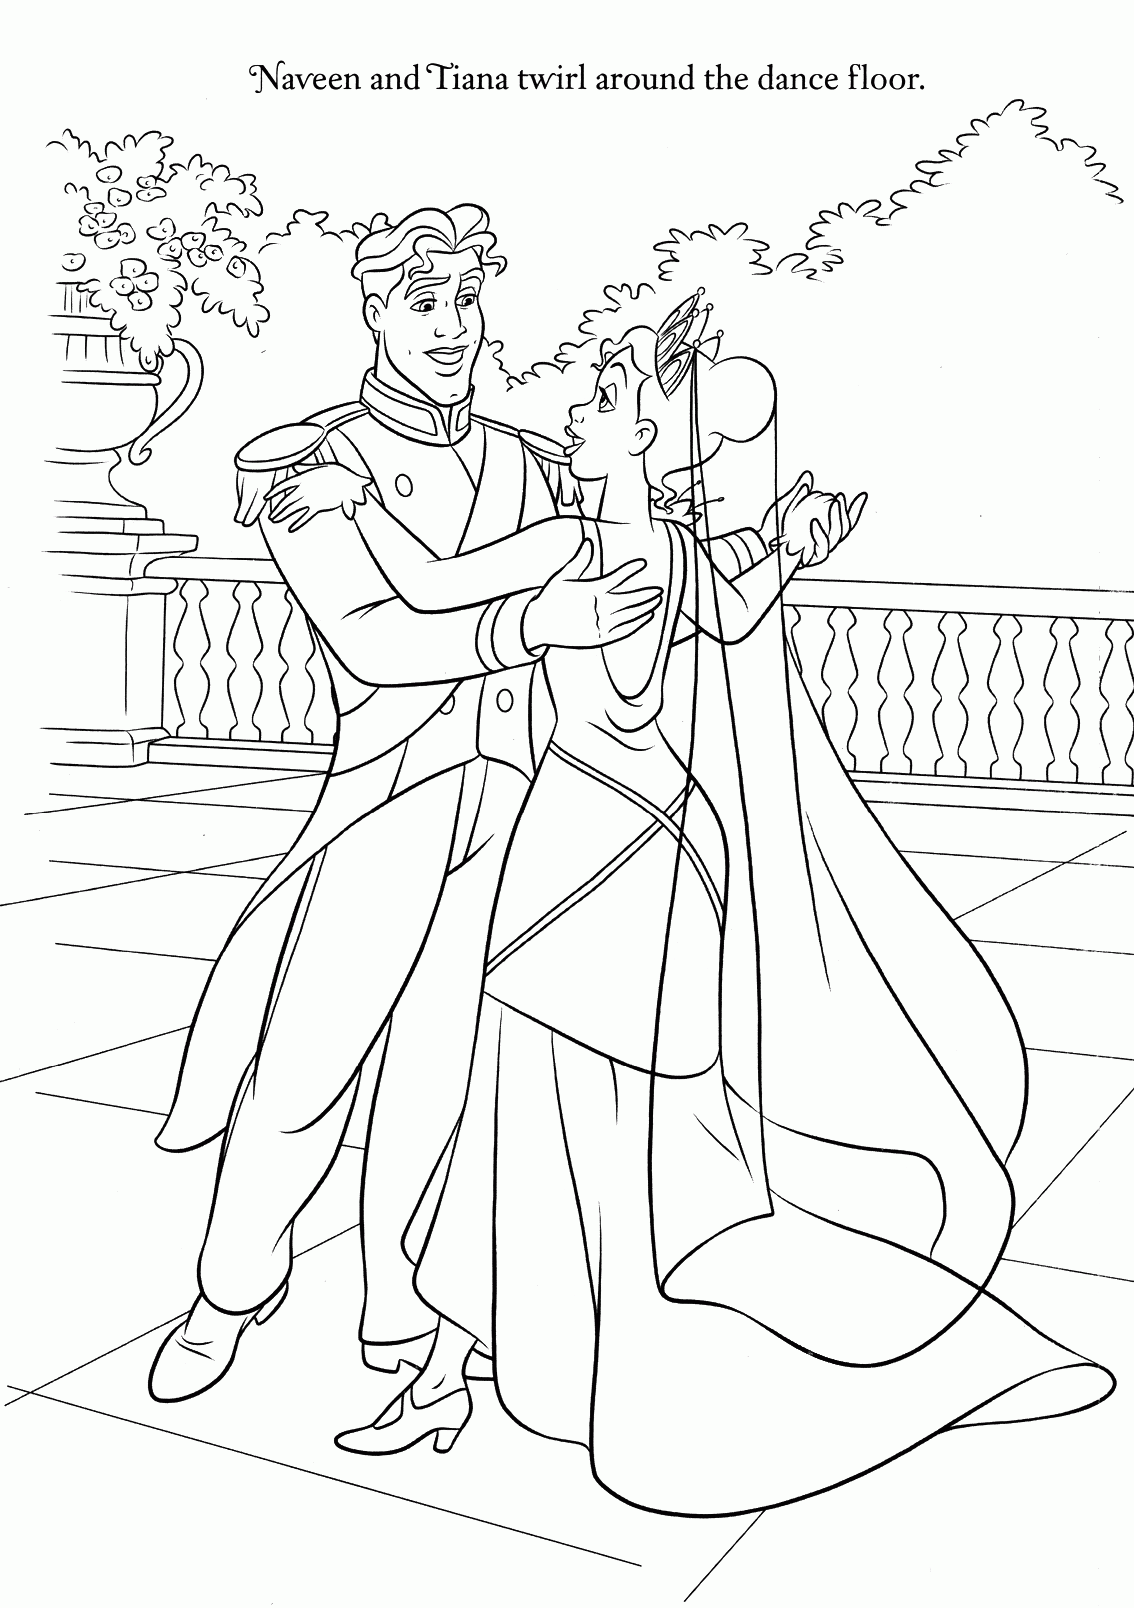 Disney Wedding Coloring Pages - Coloring Page